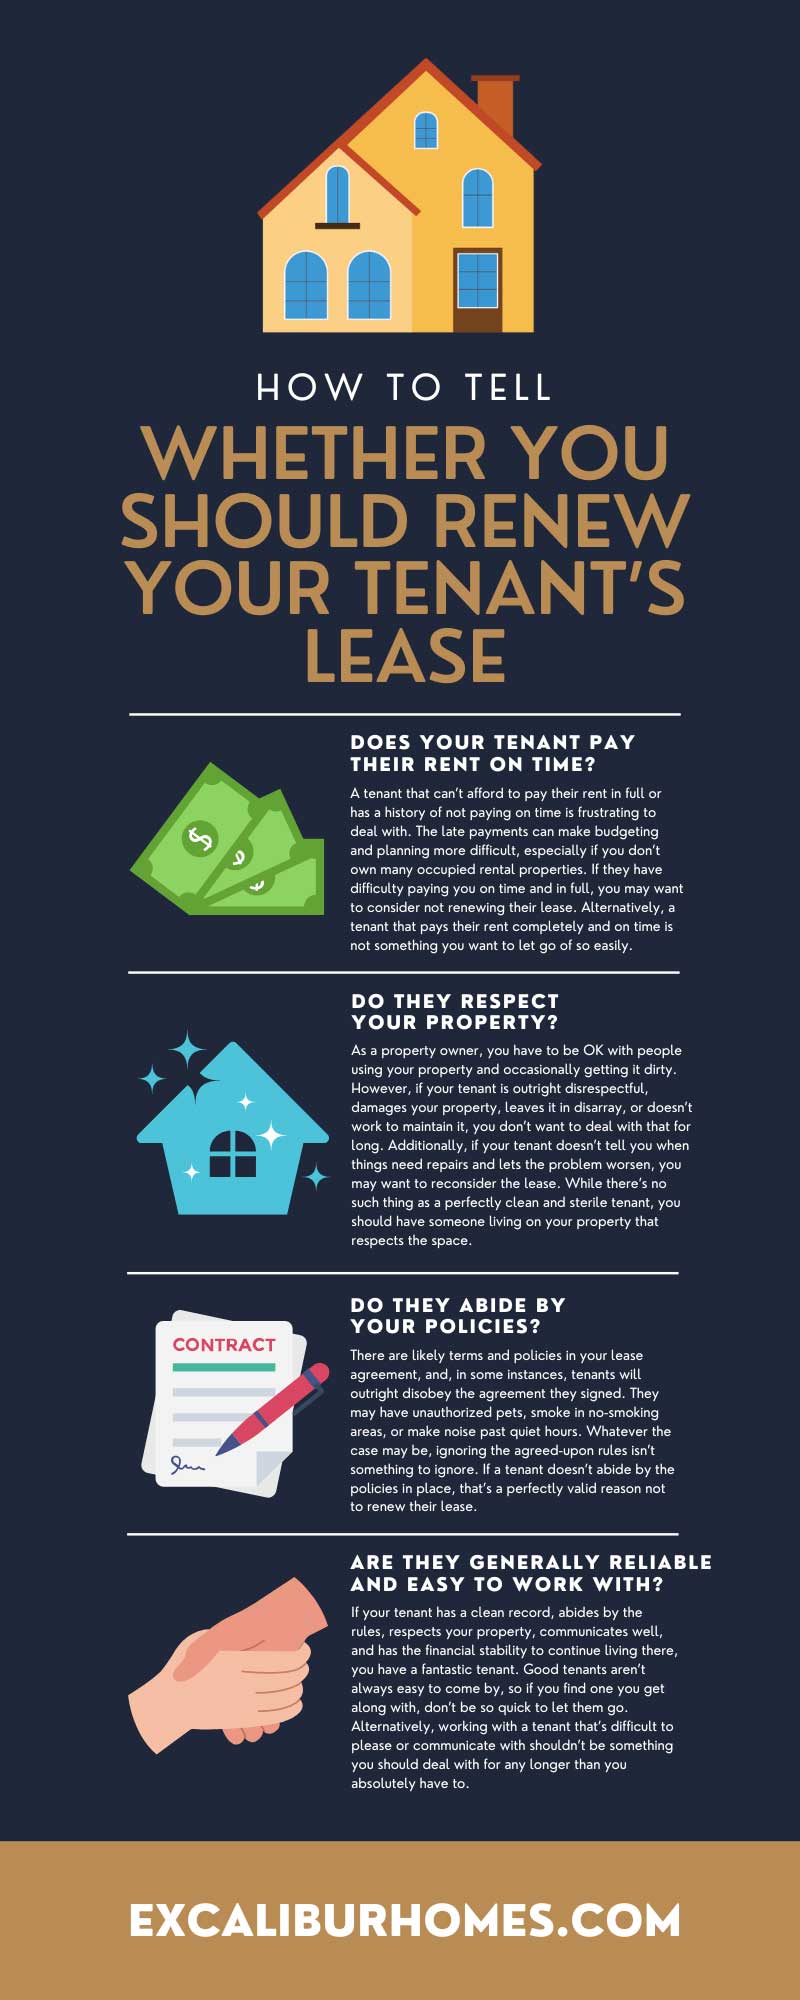 How To Tell Whether You Should Renew Your Tenant’s Lease